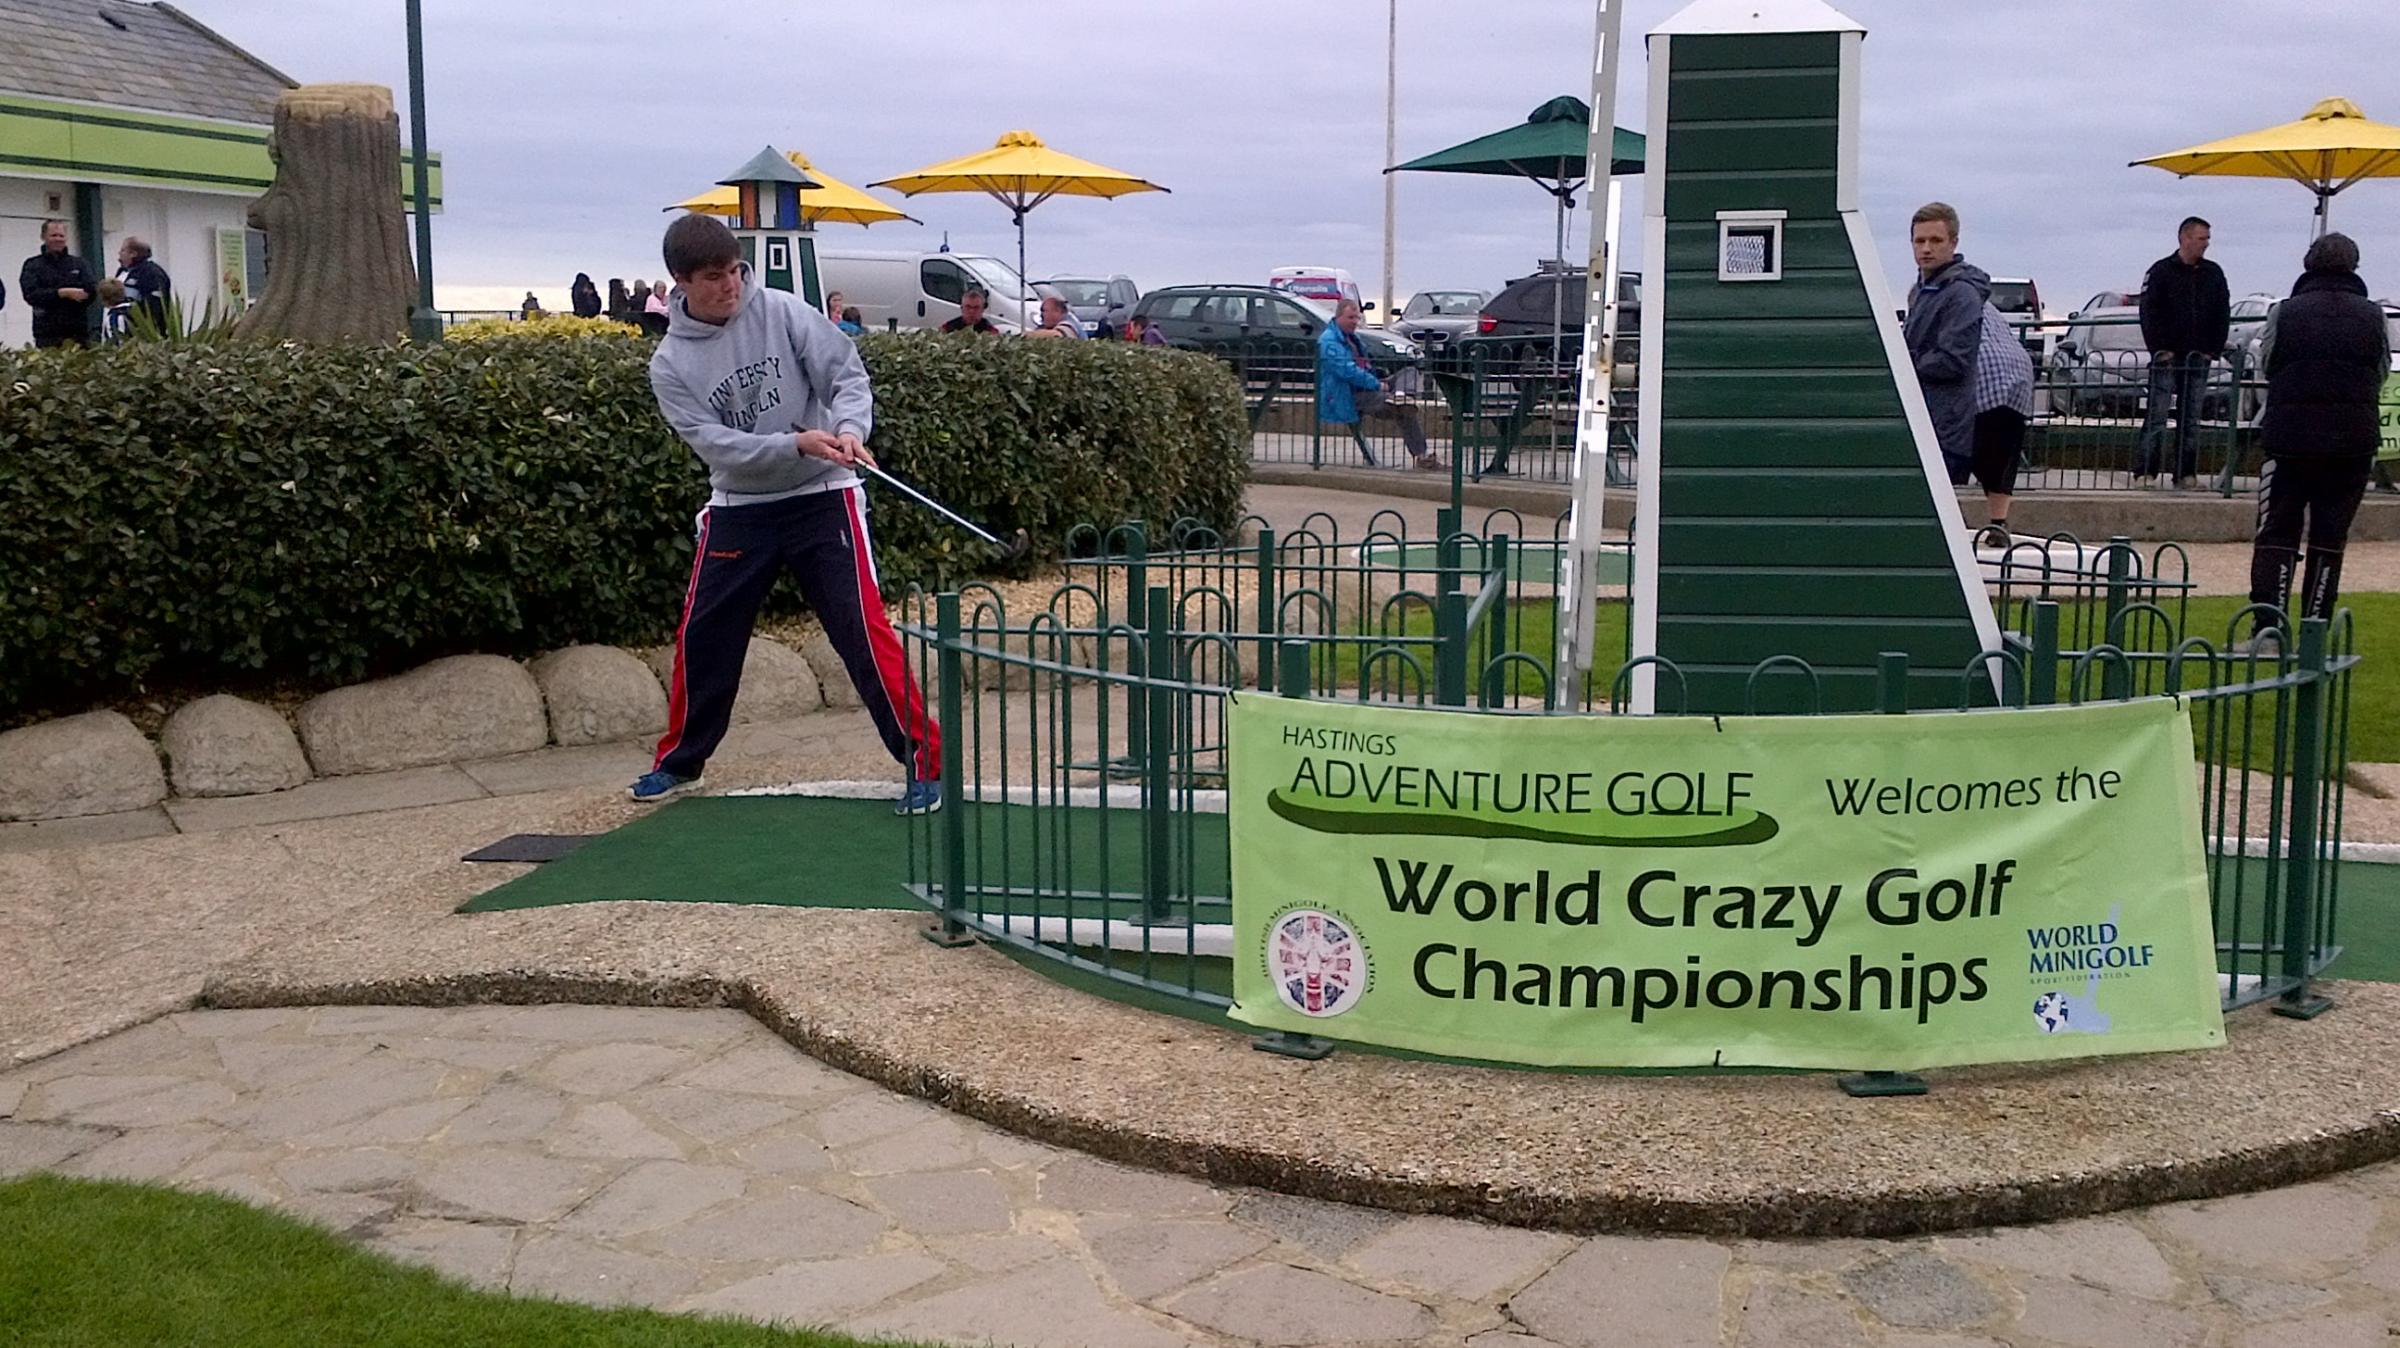 Top players at World Crazy Golf Championships